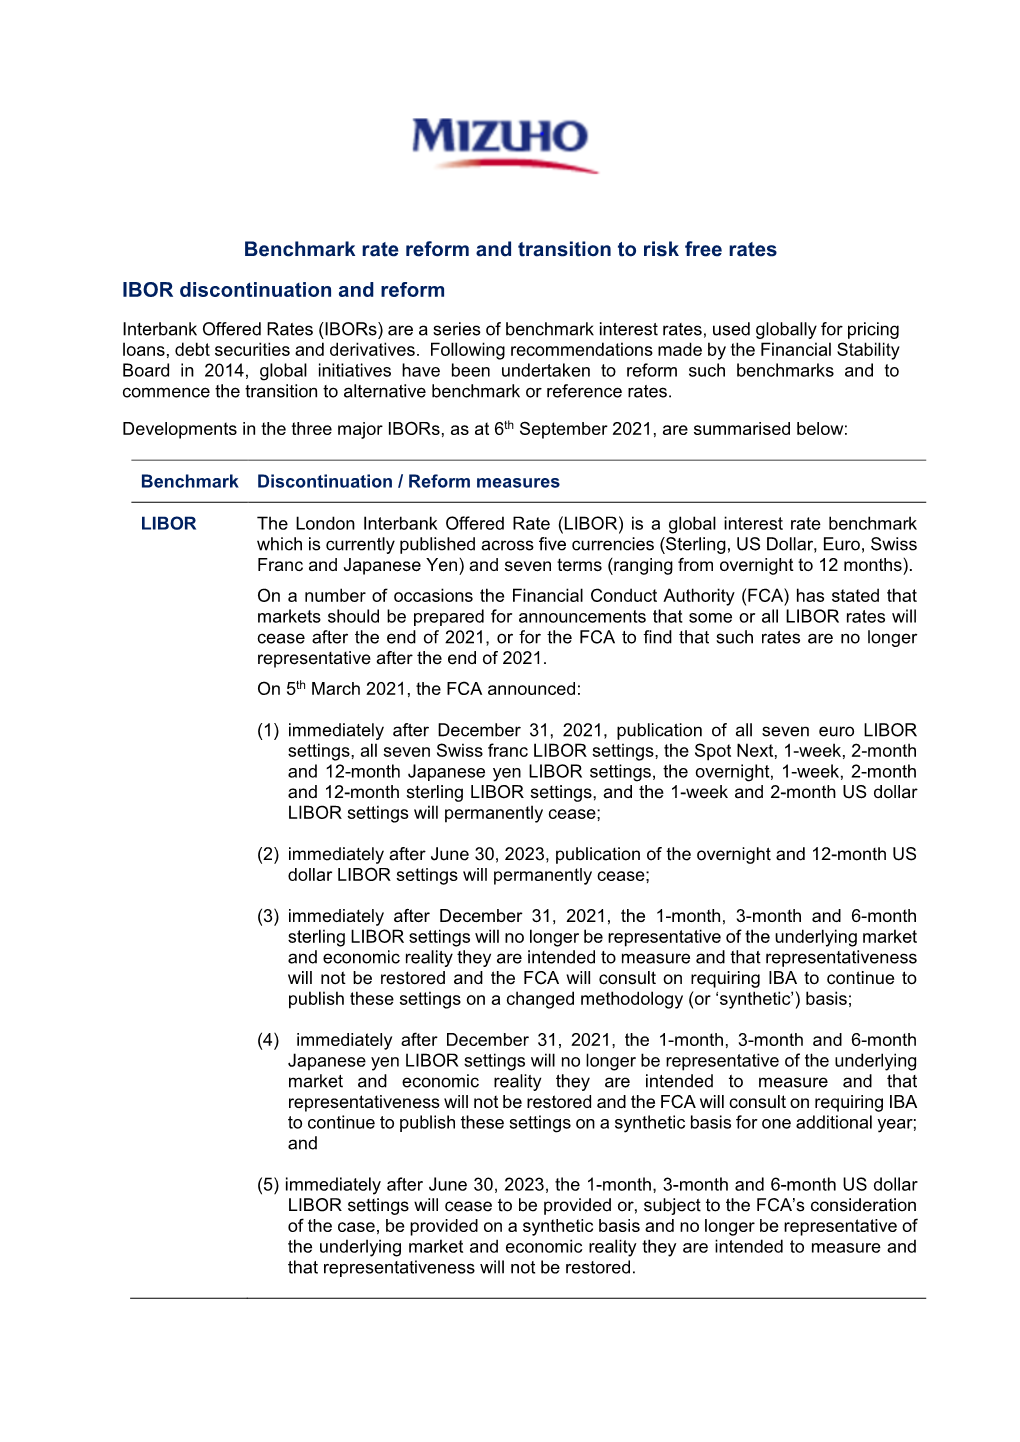 Benchmark Rate Reform and Transition to Risk Free Rates IBOR Discontinuation and Reform